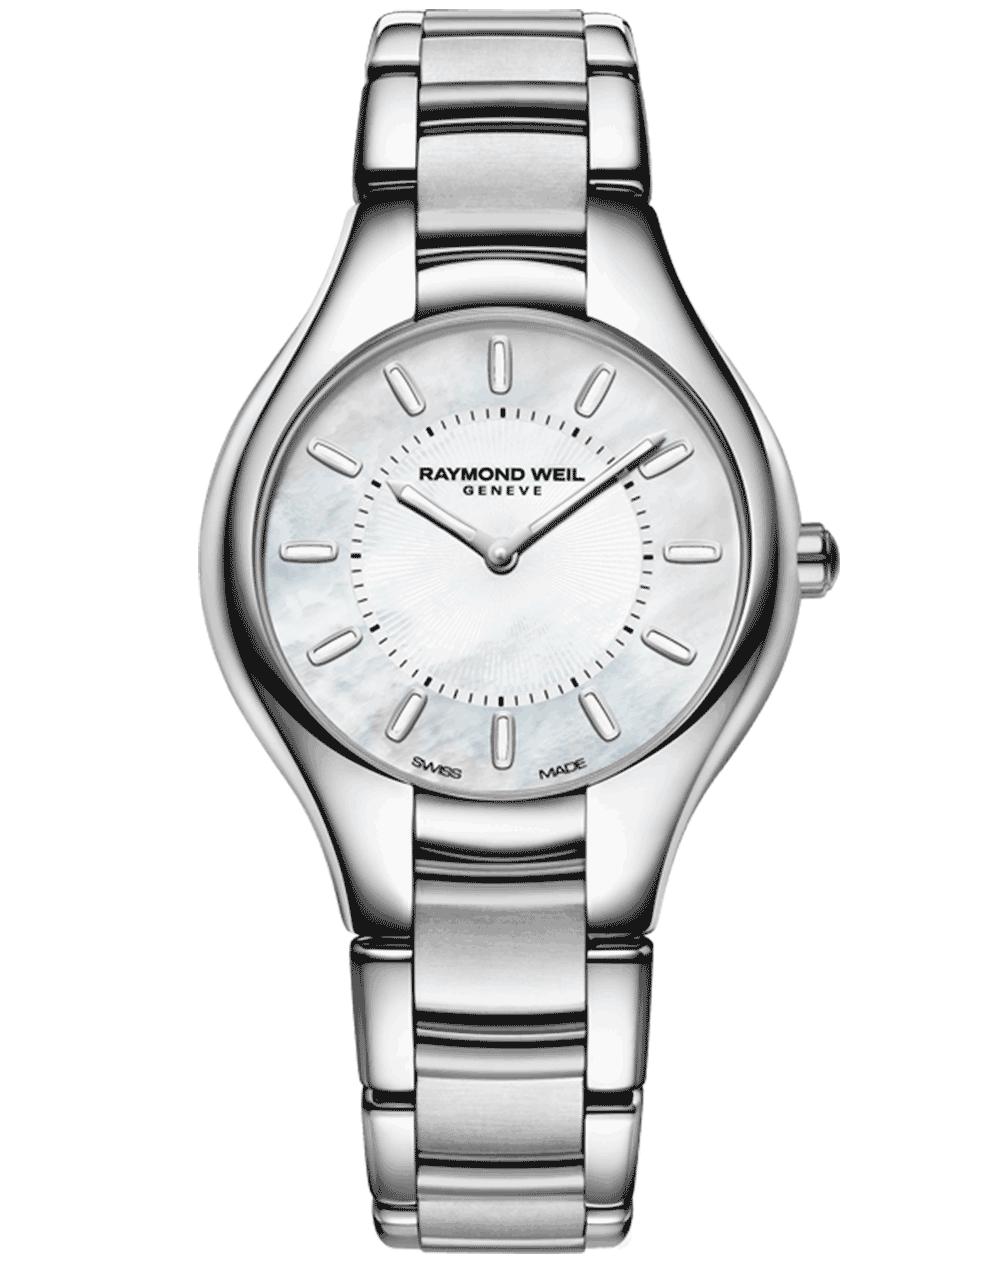 What Are Fake Mondaine Watches Like